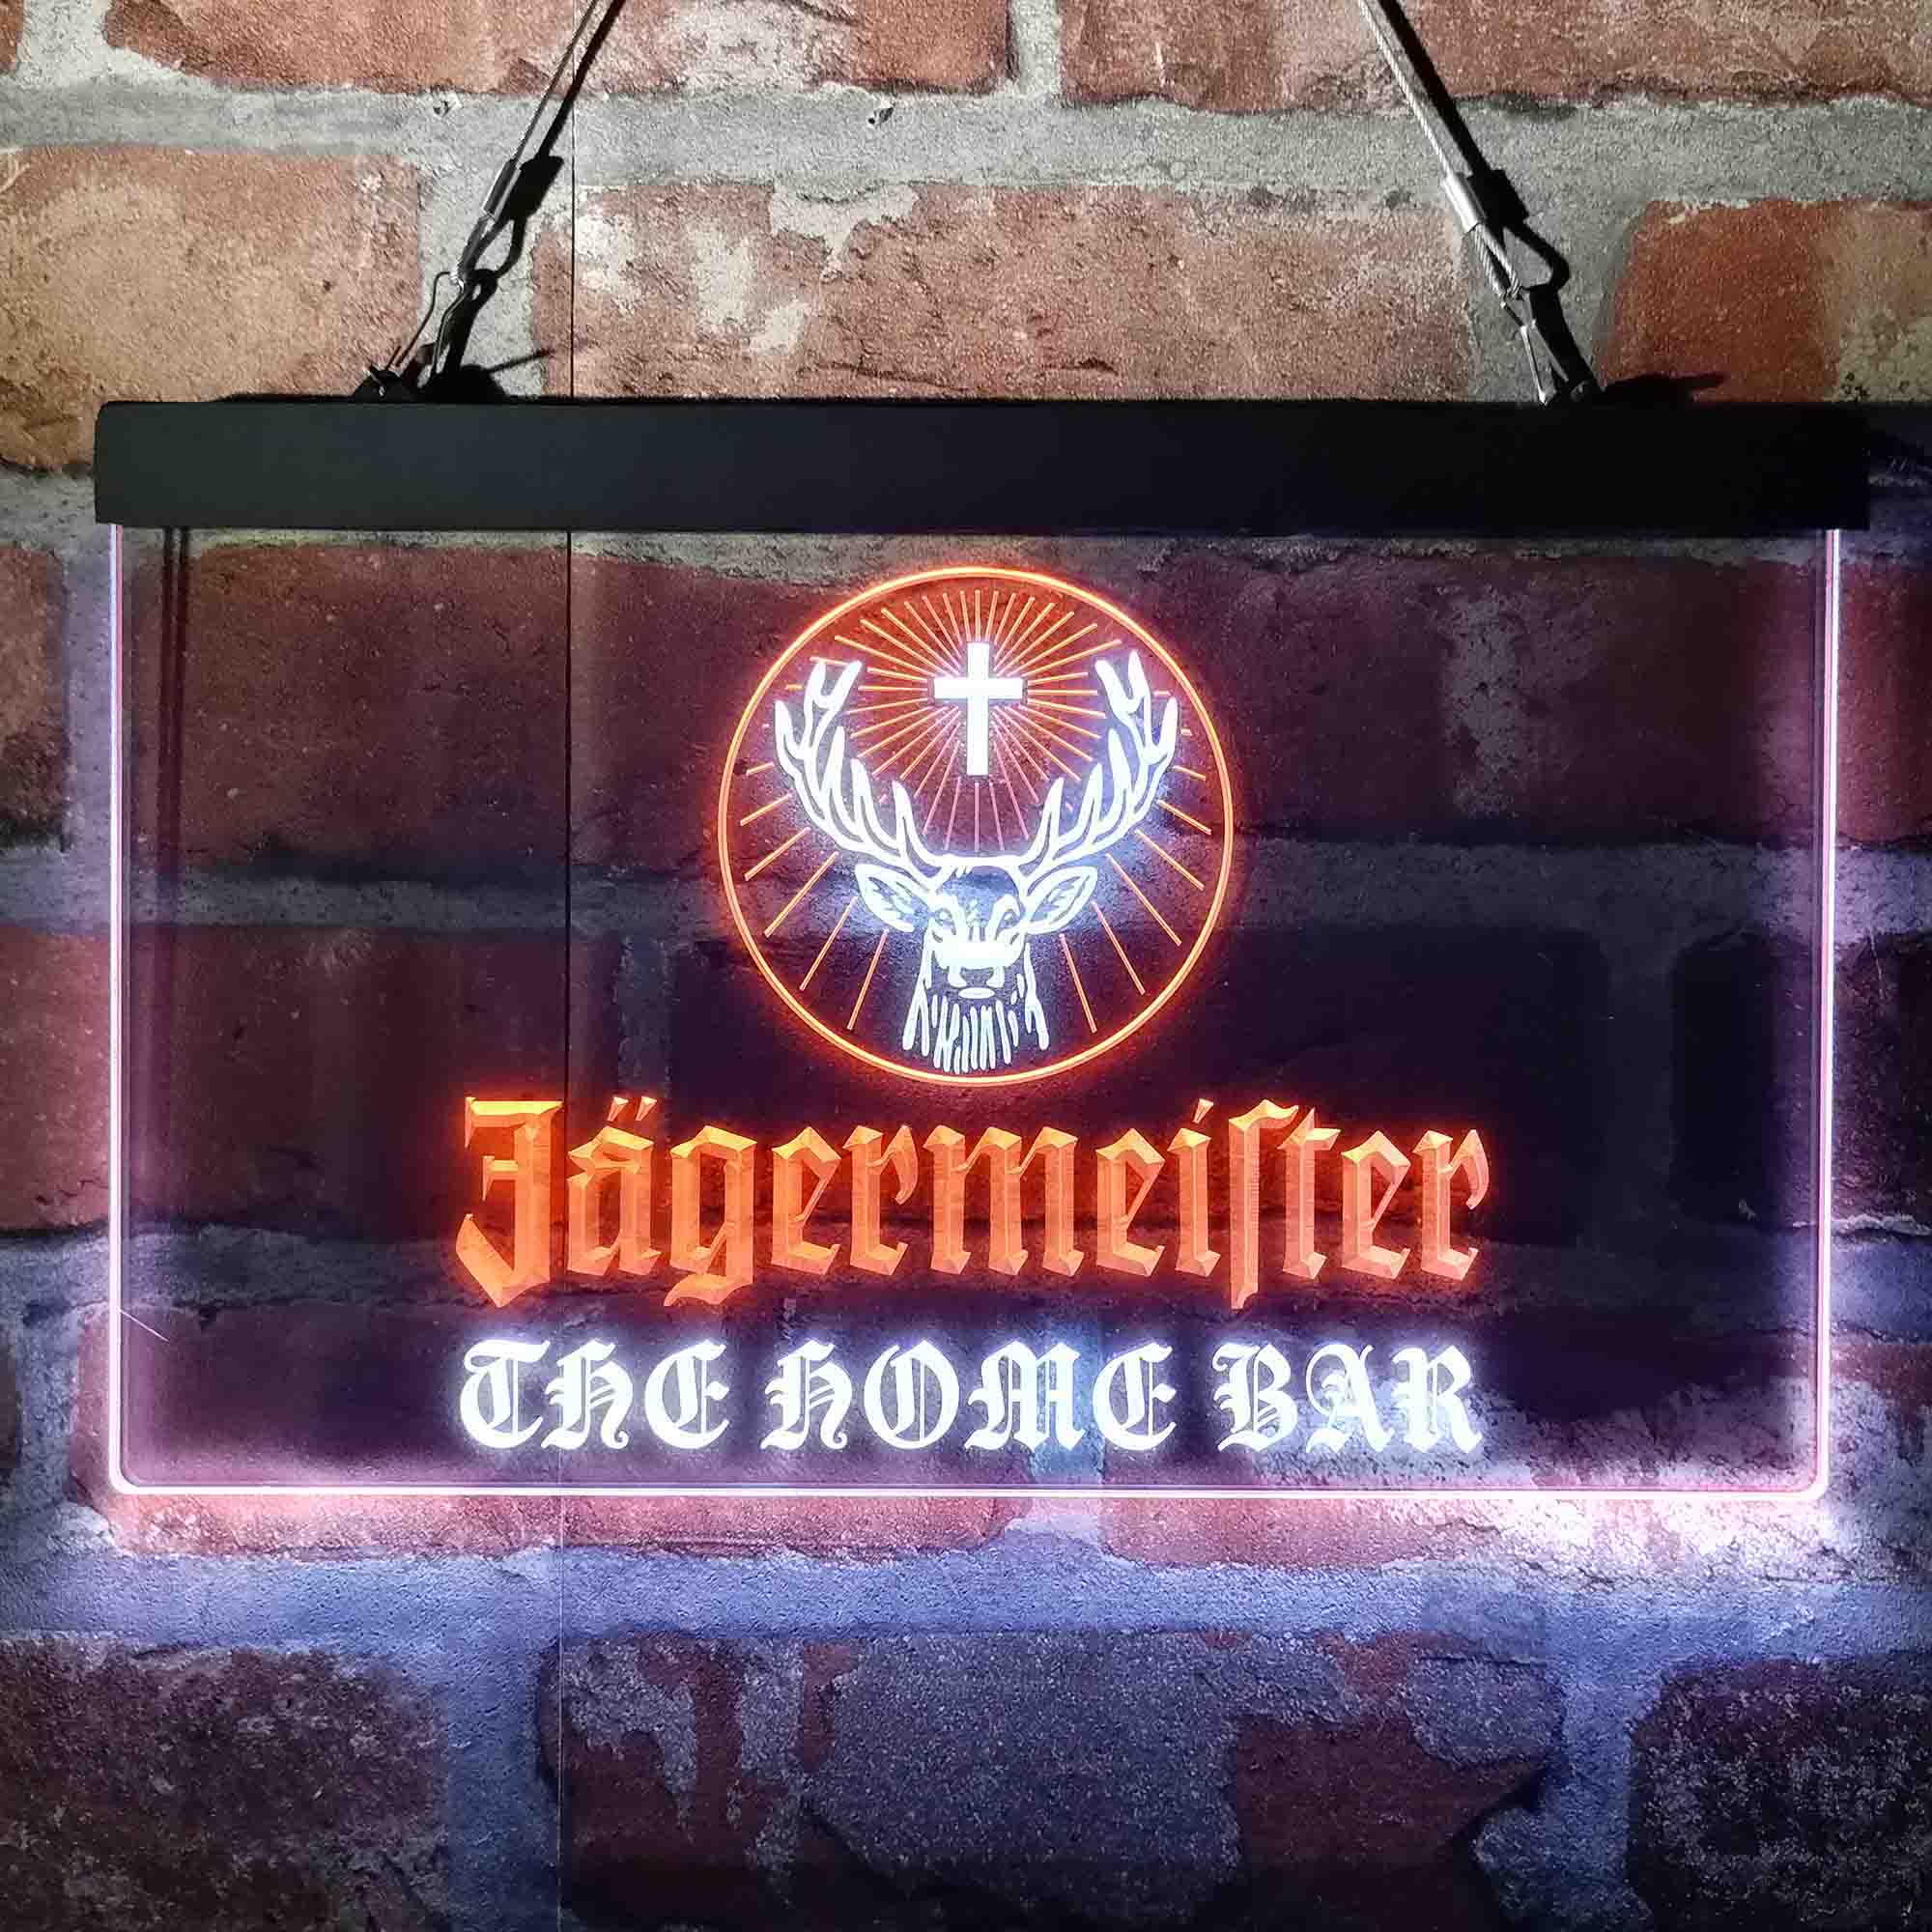 Personalized Jagermeister Deer Home Bar Neon-Like LED Sign - Custom Wall Decor Gift